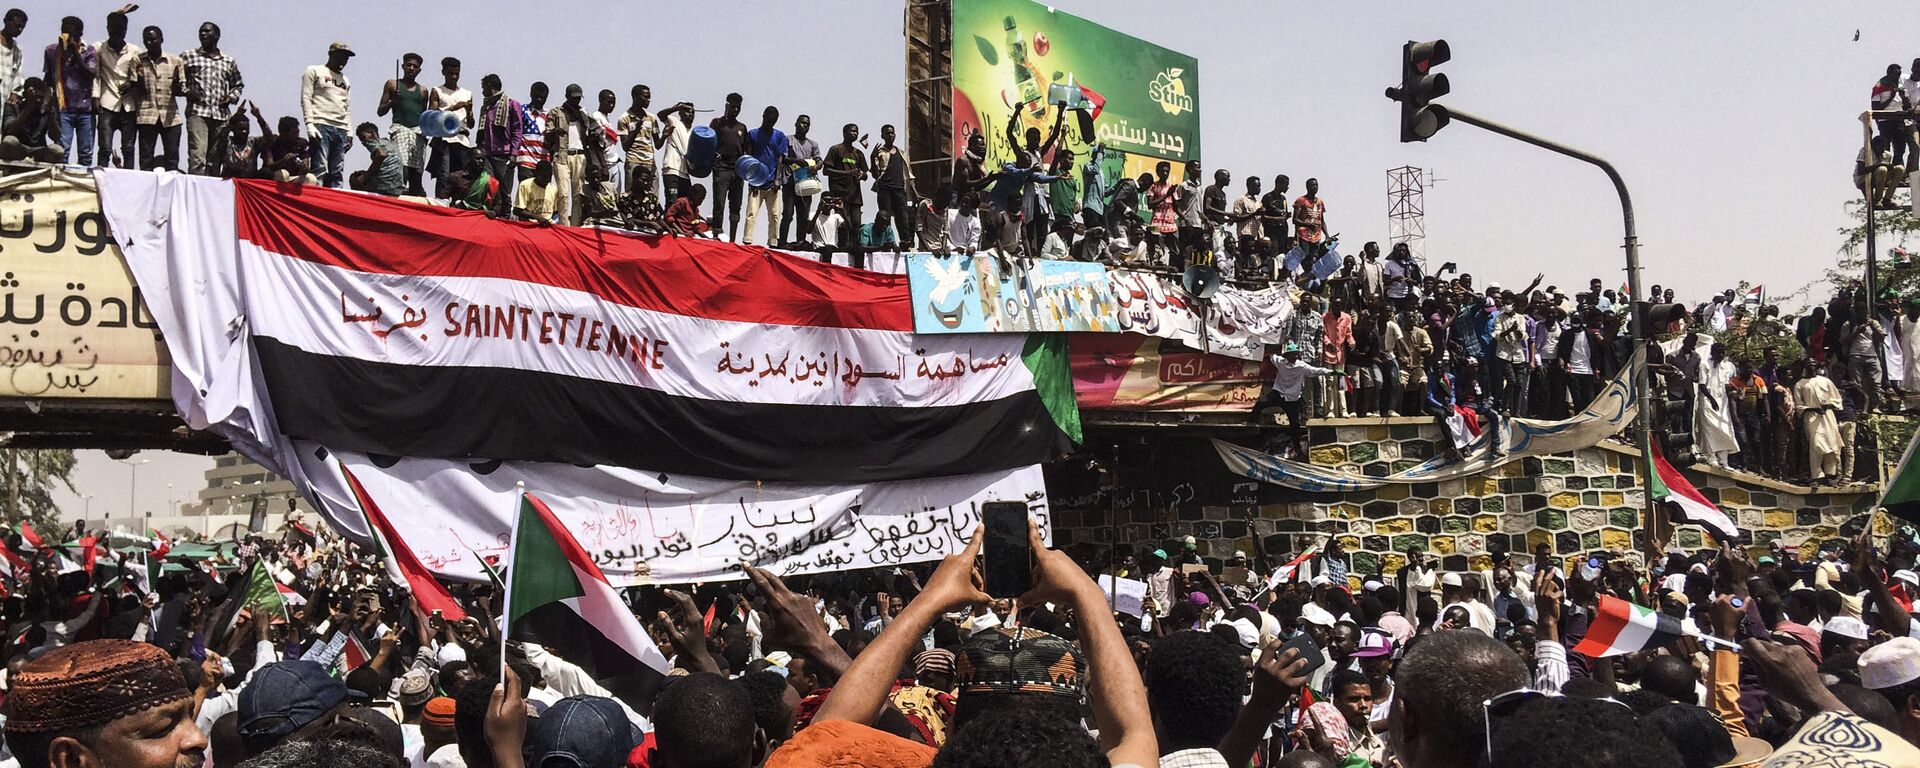 Demonstrators gather in Sudan's capital of Khartoum, Friday, April 12, 2019. The Sudanese protest movement has rejected the military's declaration that it has no ambitions to hold the reins of power for long after ousting the president of 30 years, Omar al-Bashir. The writing on the Sudanese flag says 'With the participation of the Sudanese in Saint Etienne, France.' - Sputnik International, 1920, 21.11.2021